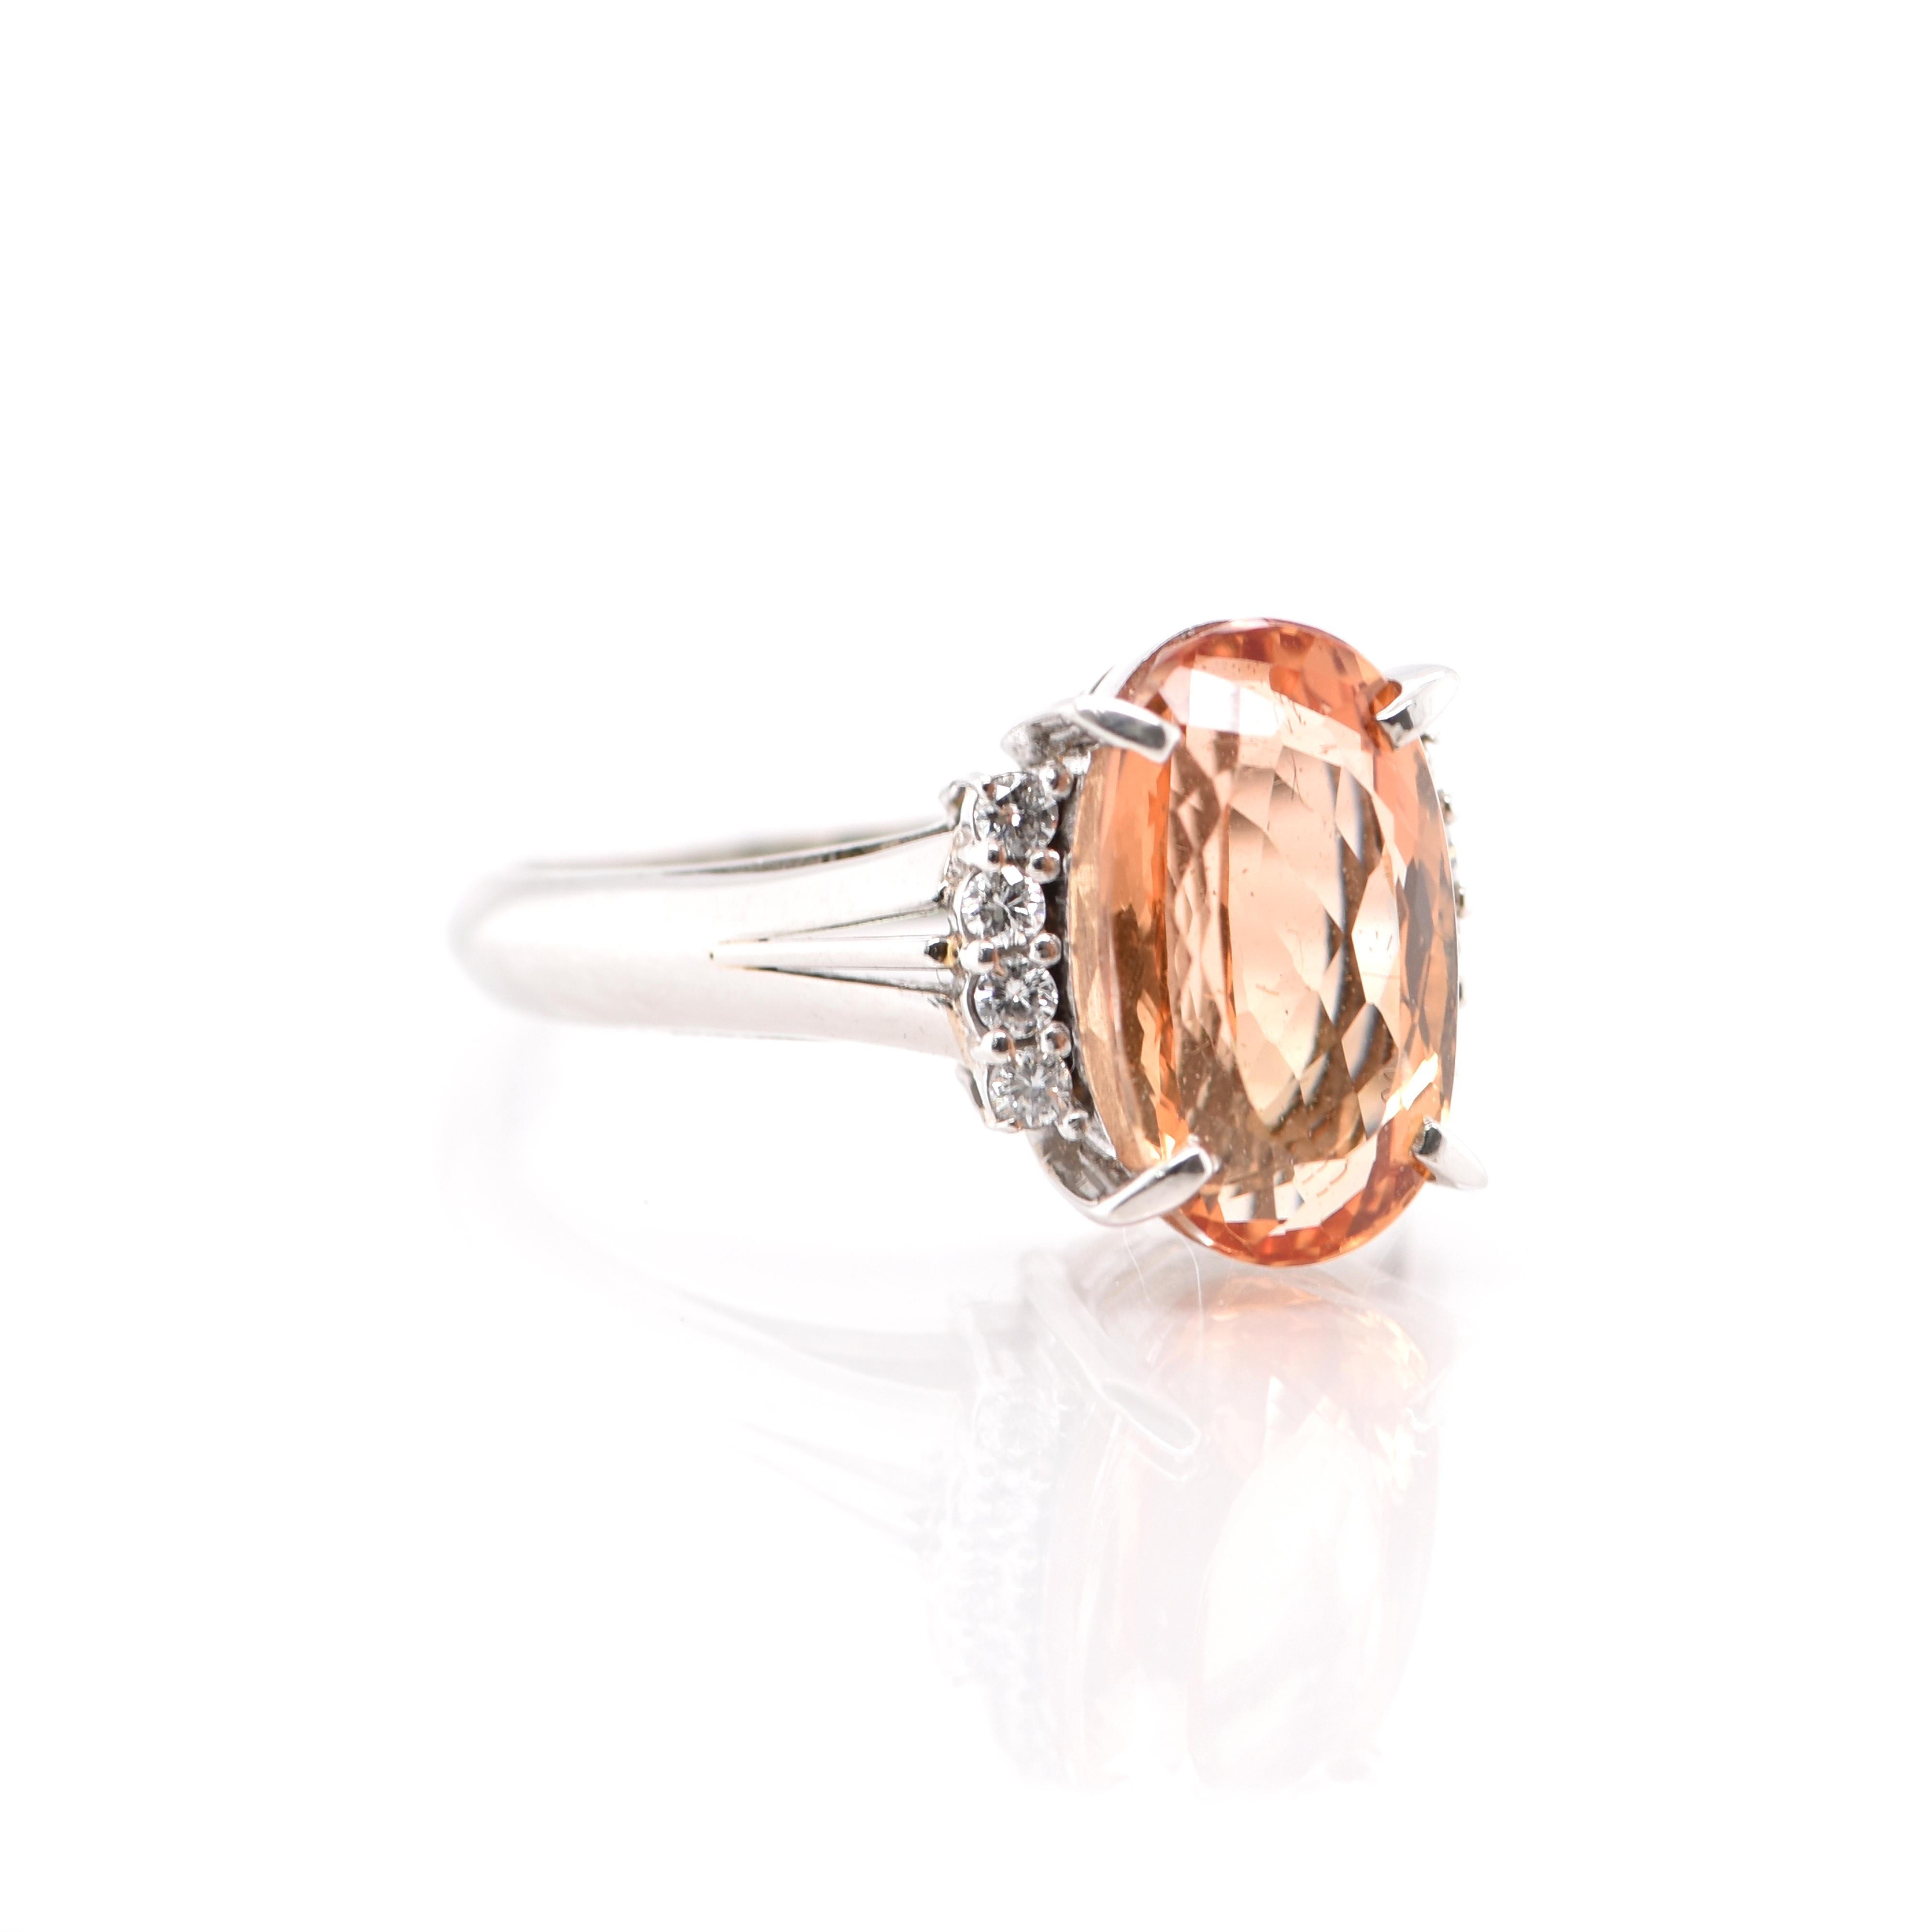 Oval Cut 4.05 Carat Imperial Topaz and Diamond Cocktail Ring Set in Platinum